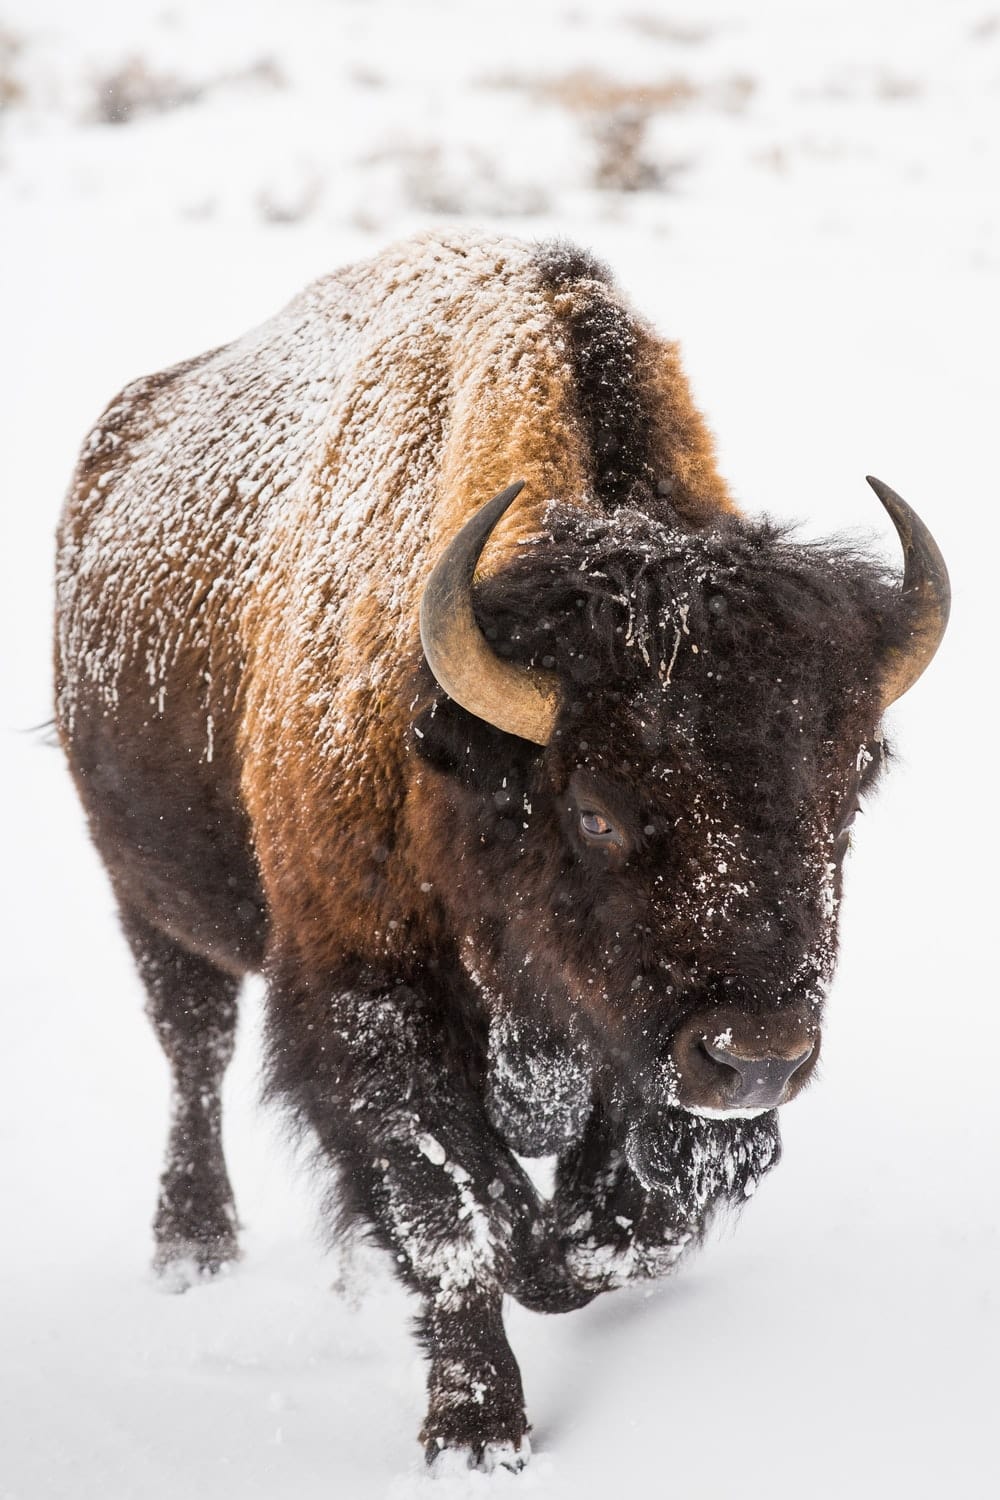 Cross Stitch | Bison - Brown Bison On White Snow Covered Ground During Daytime - Cross Stitched